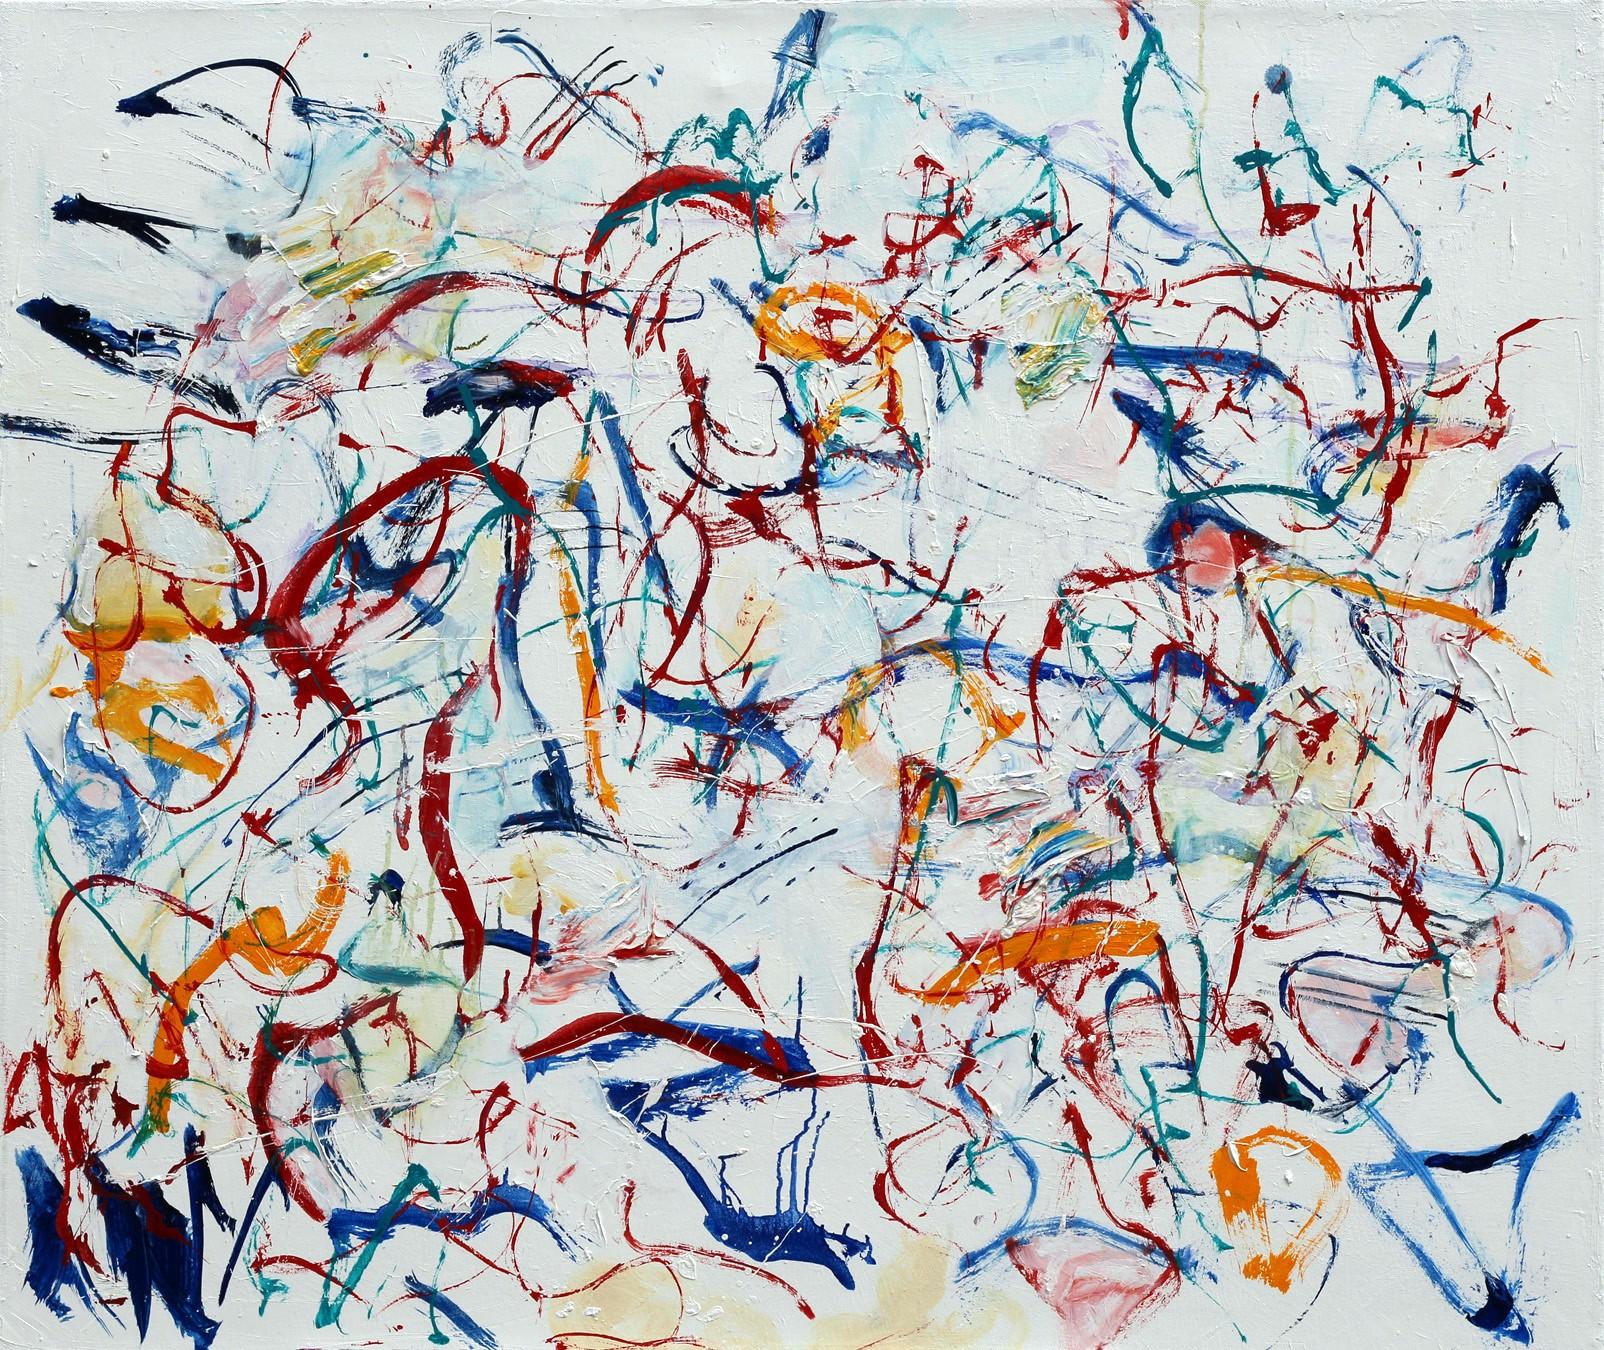 "Entanglements", abstract, expressionist, red, blue, yellow, oil painting - Painting by Katherine Borkowski-Byrne